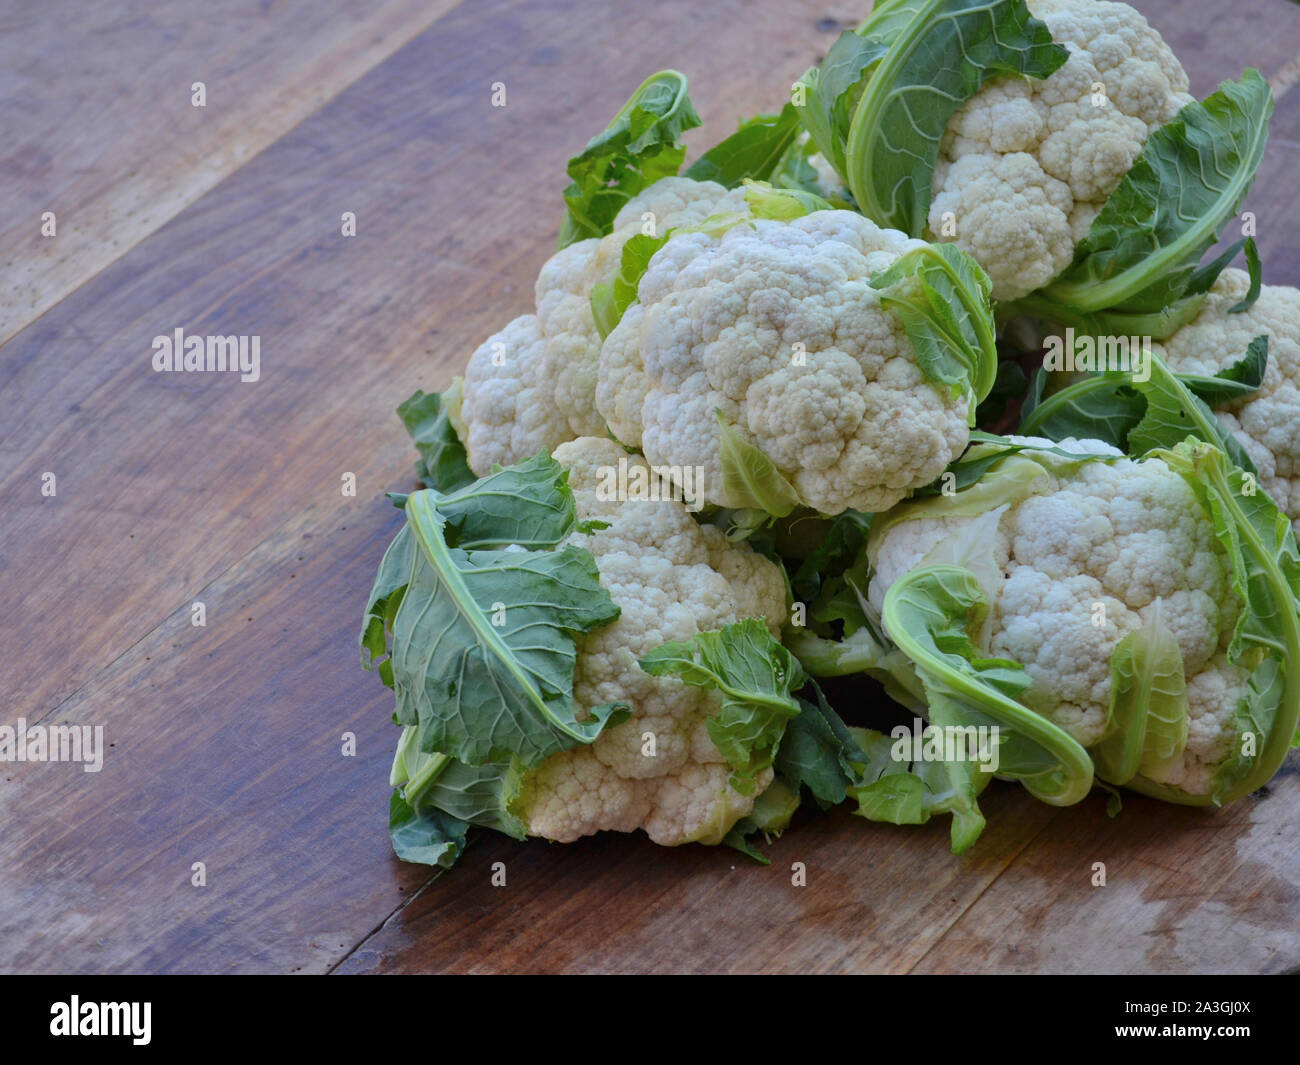 Cauliflower for pickling on a rustic wooden table,  Brassica oleracea . botrytis Stock Photo